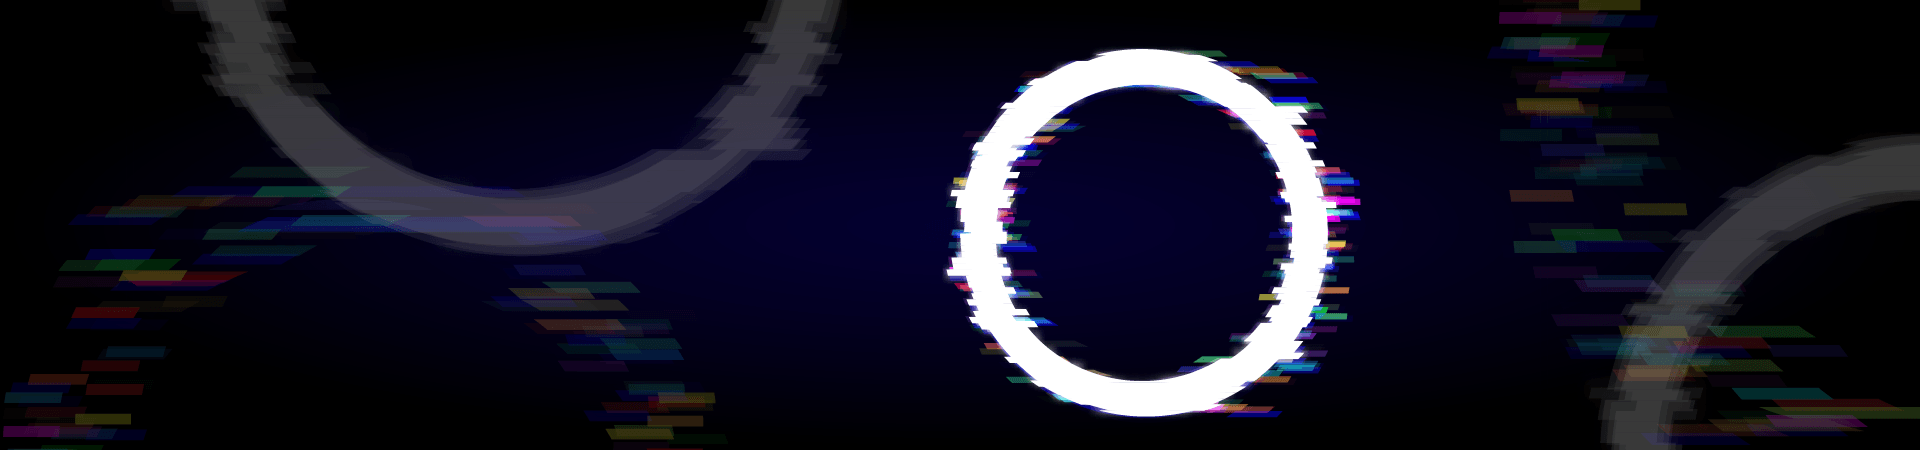 DONOTUSE-care-full-glitch-banner.png